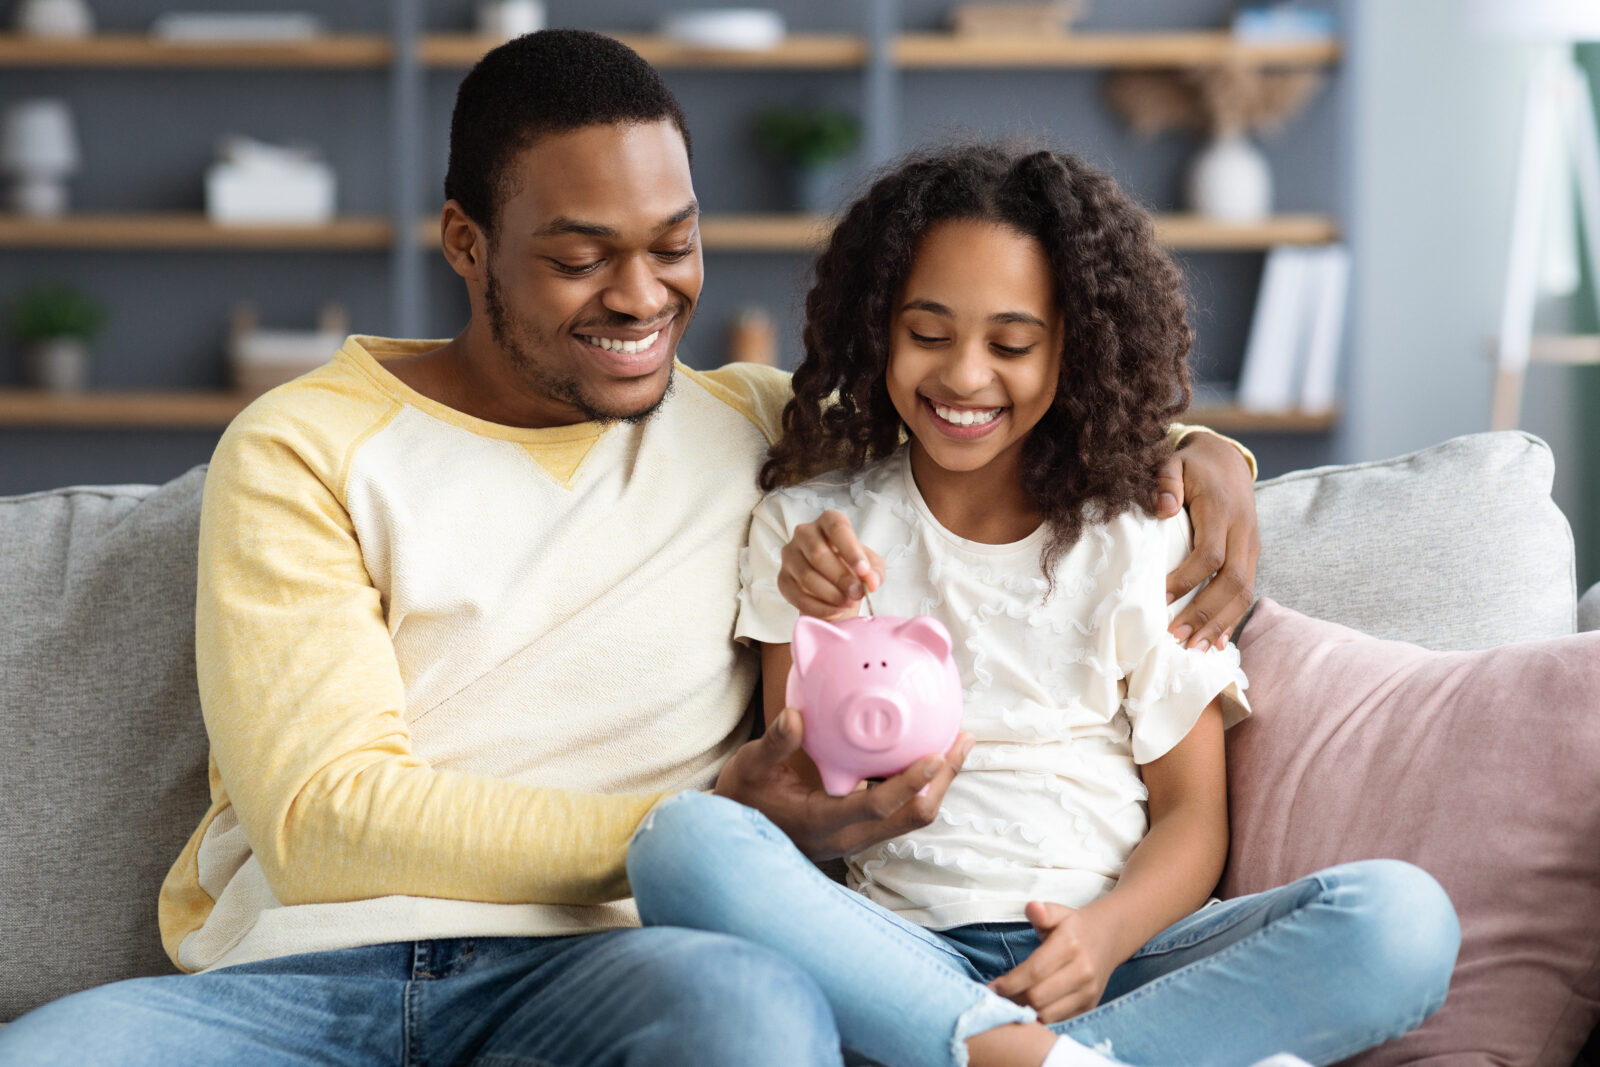 Black girl and father putting coin into piggy bank, sitting on sofa at home. Happy african american dad teaching his cute daughter how to save money, living room interior. Financial education concept